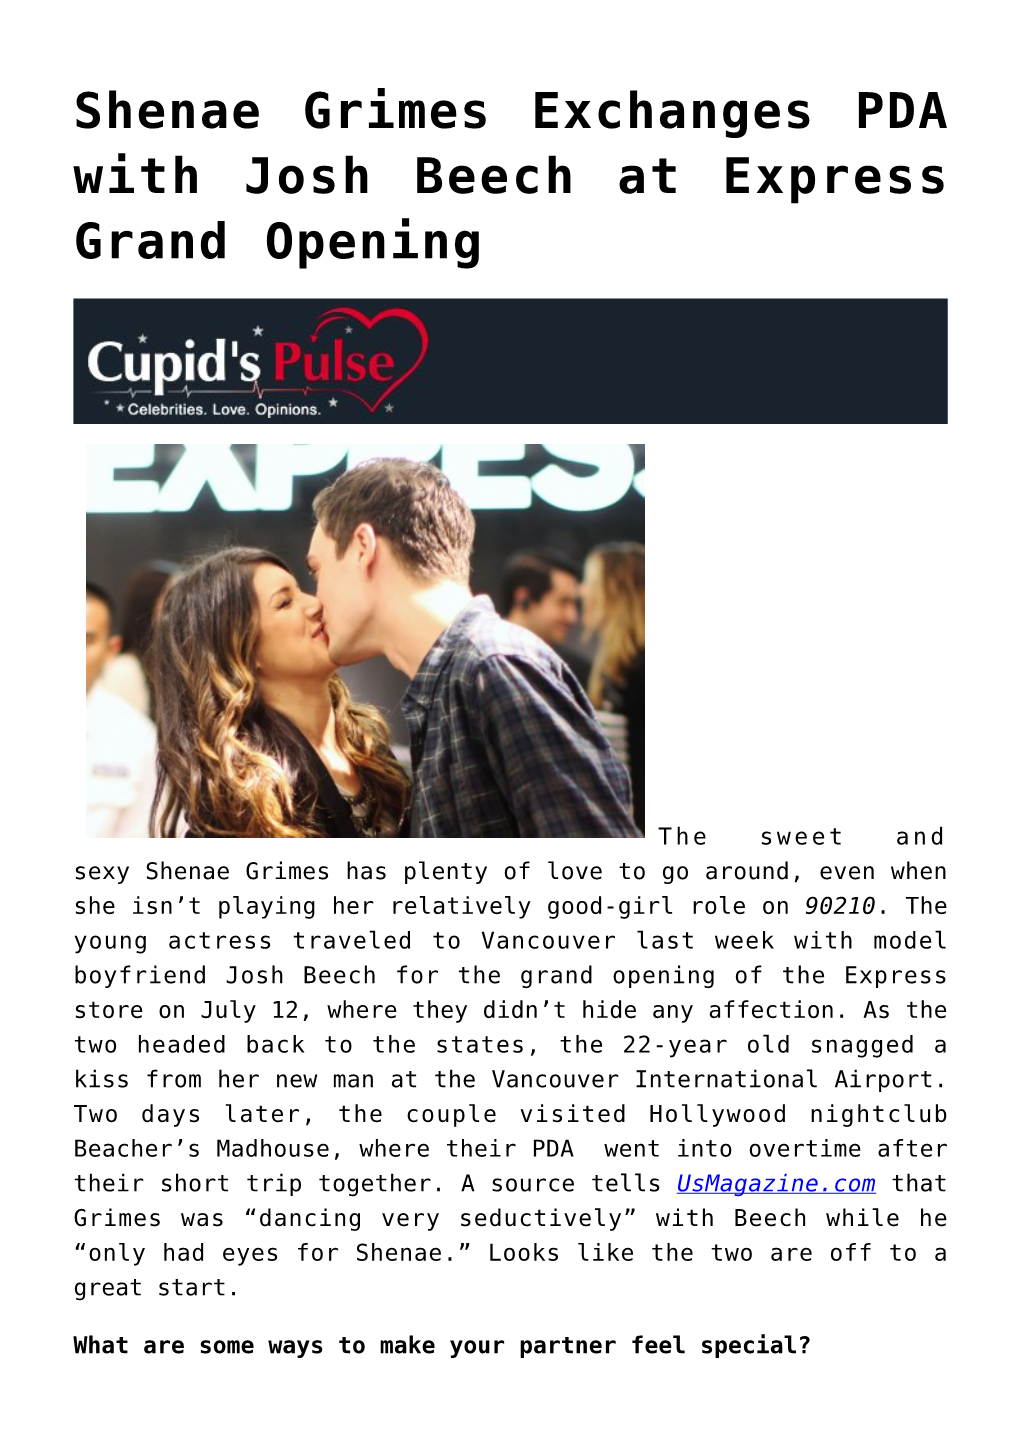 Shenae Grimes Exchanges PDA with Josh Beech at Express Grand Opening